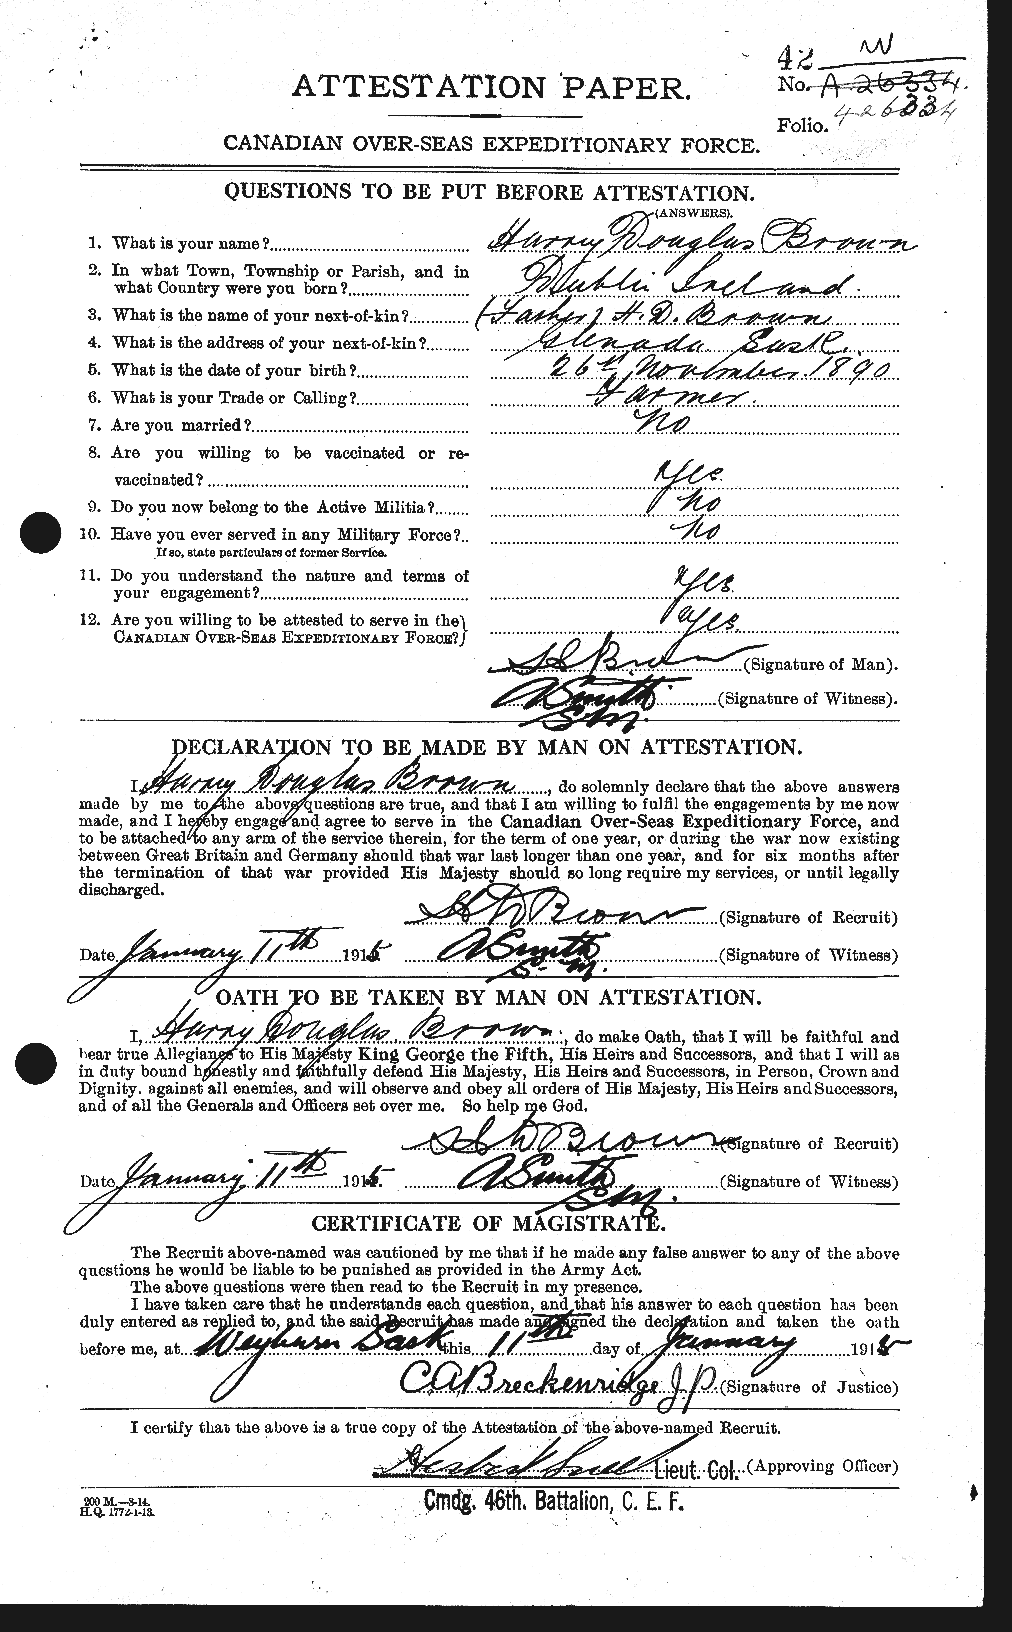 Personnel Records of the First World War - CEF 265450a